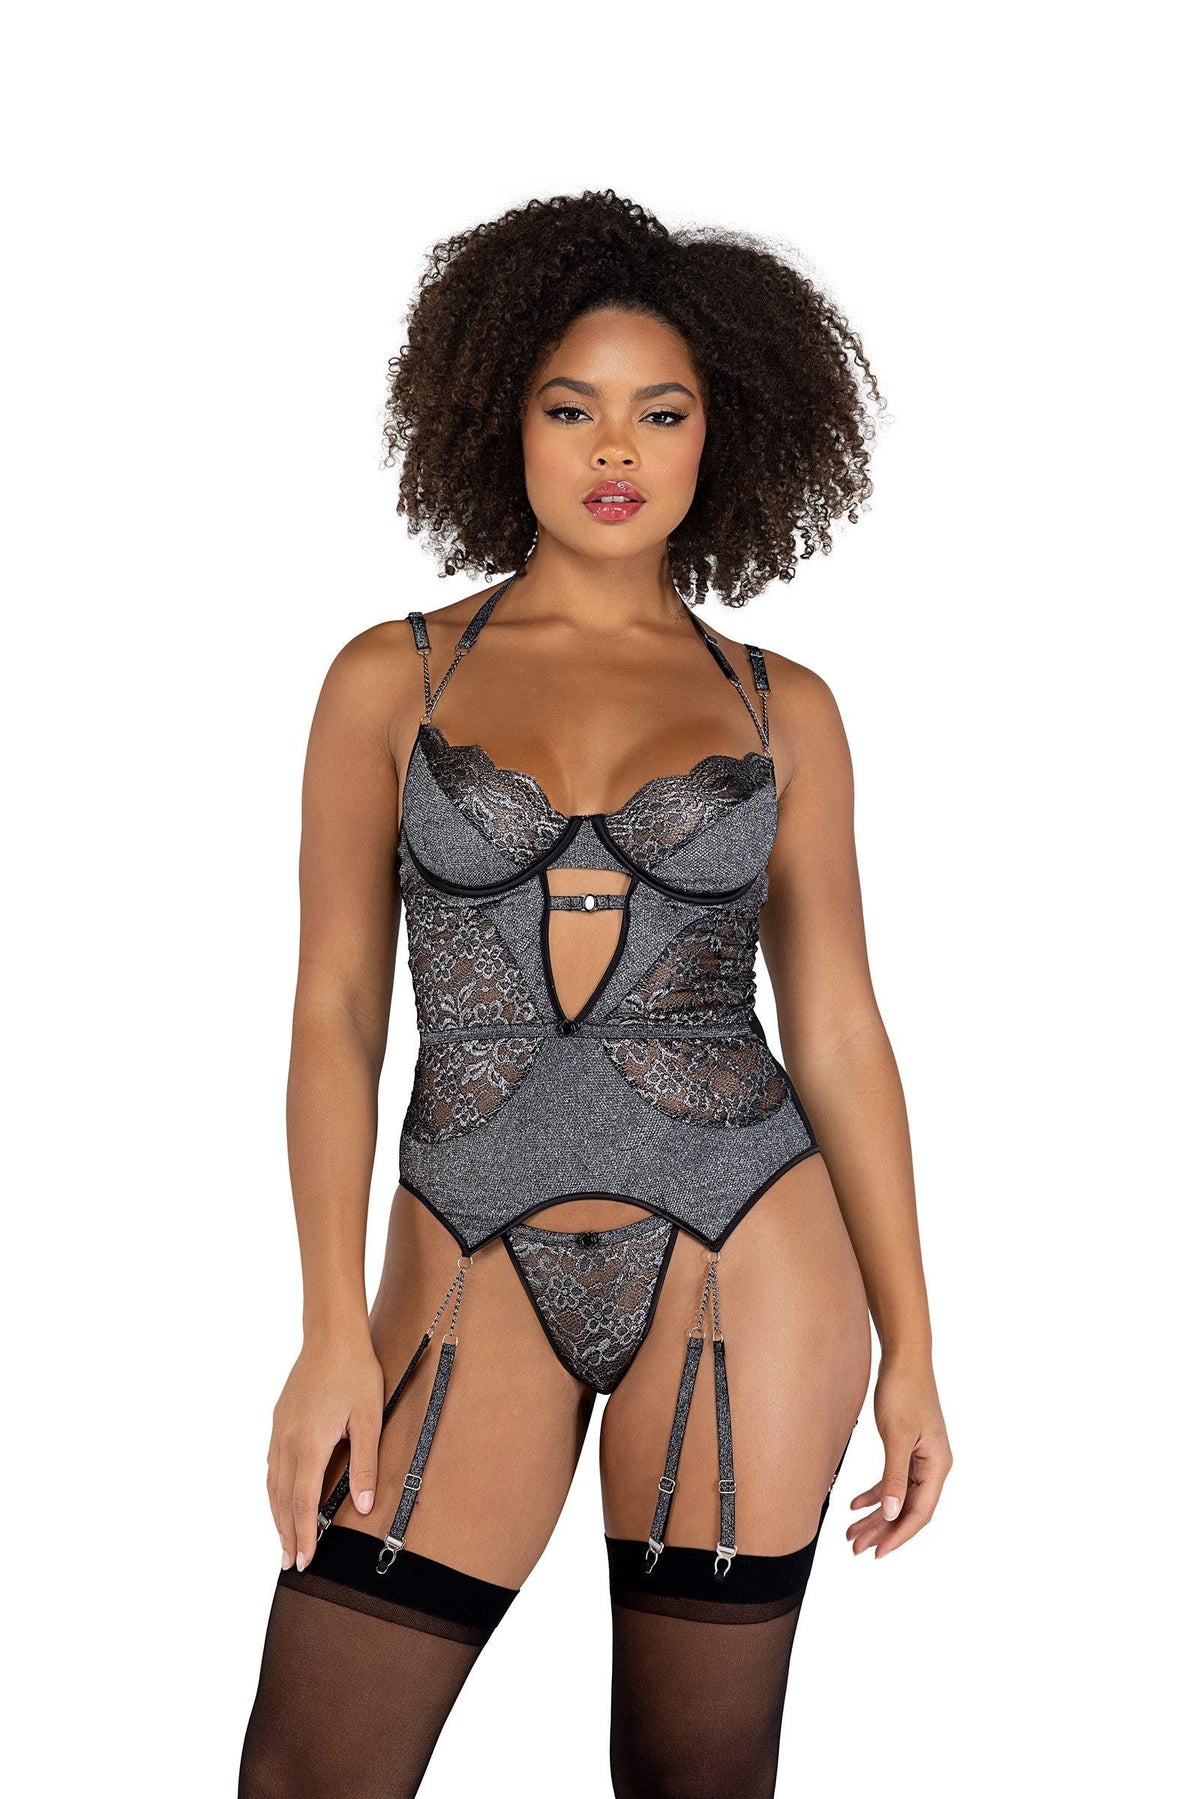 Roma Costume 2PC Sparkle Chained Bustier Set - Flyclothing LLC